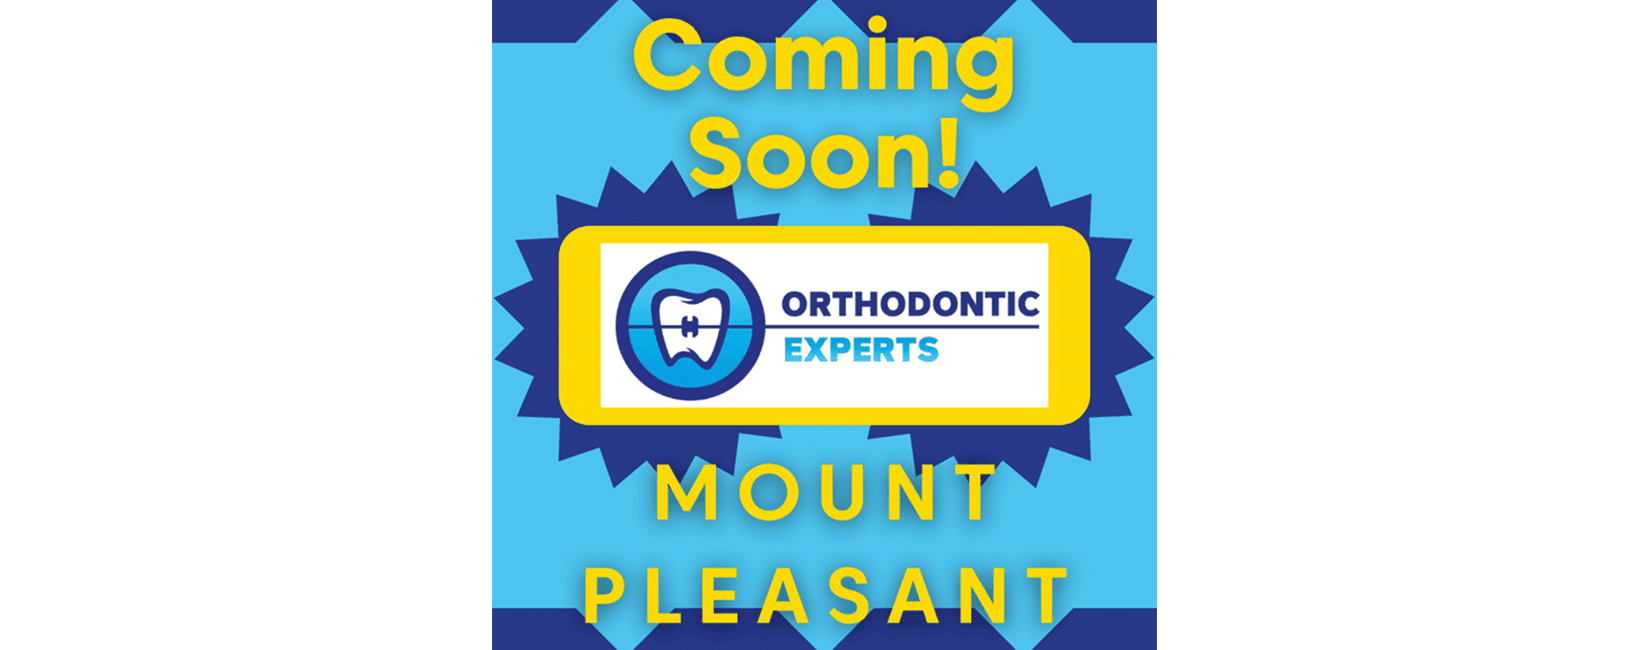 Mount please opening coming soon decorative post